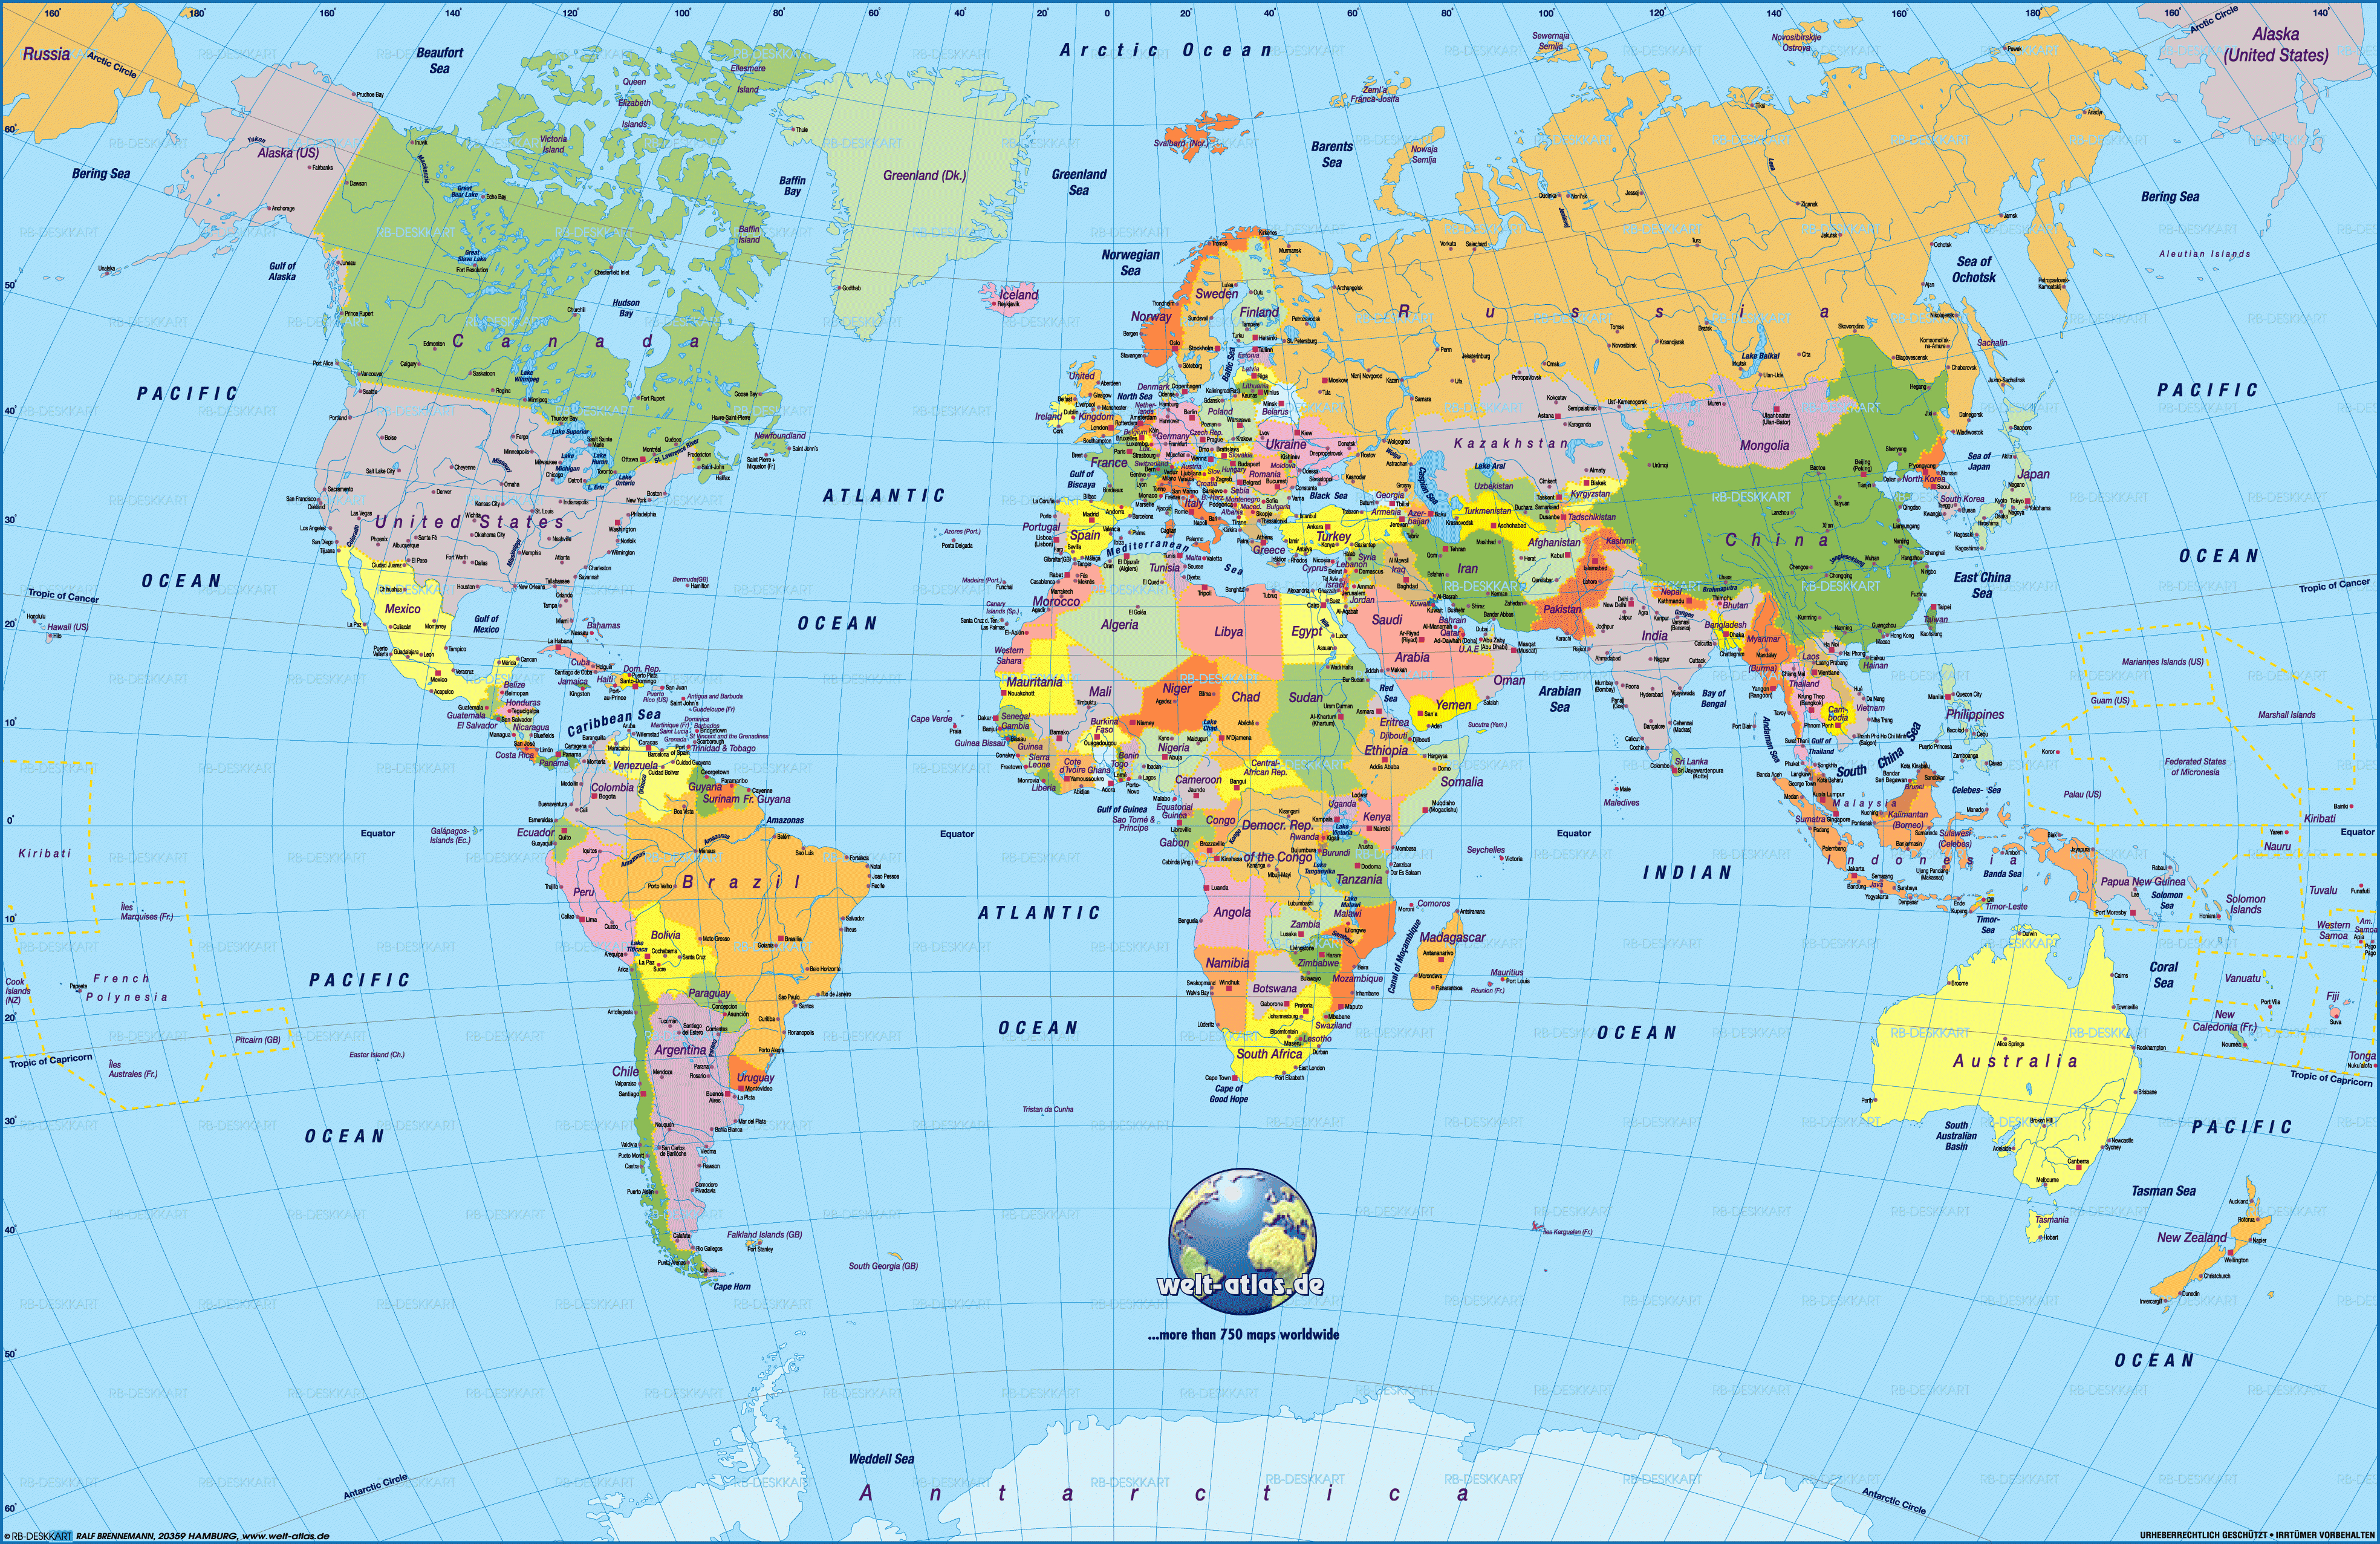 Printable World Map Labeled | World Map See Map Details From Ruvur - Printable World Map With Countries Labeled Pdf